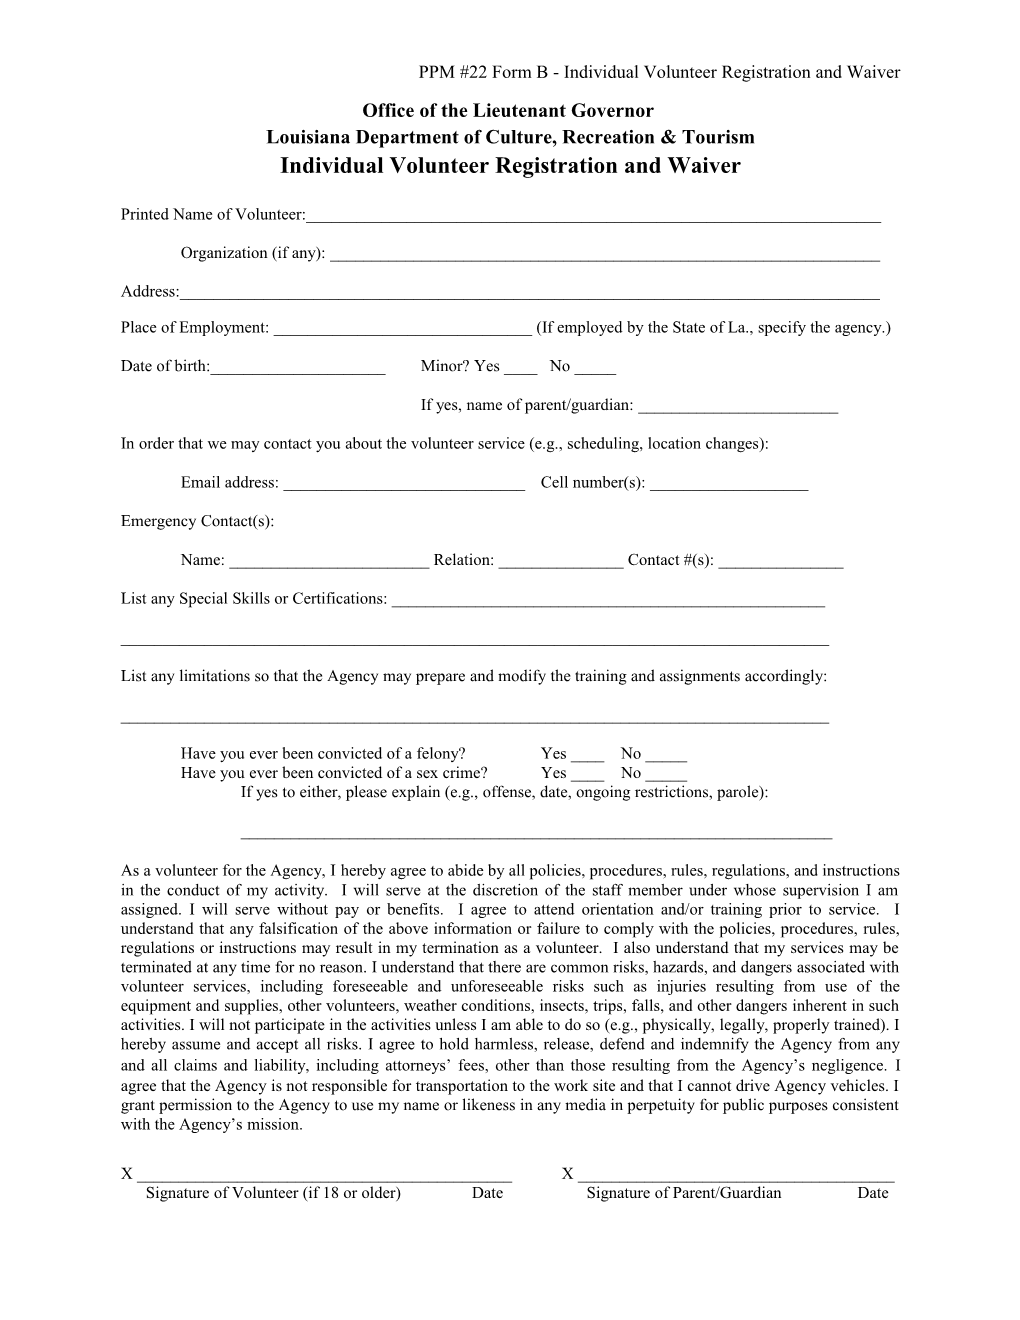 PPM #22 Form B - Individual Volunteer Registration and Waiver